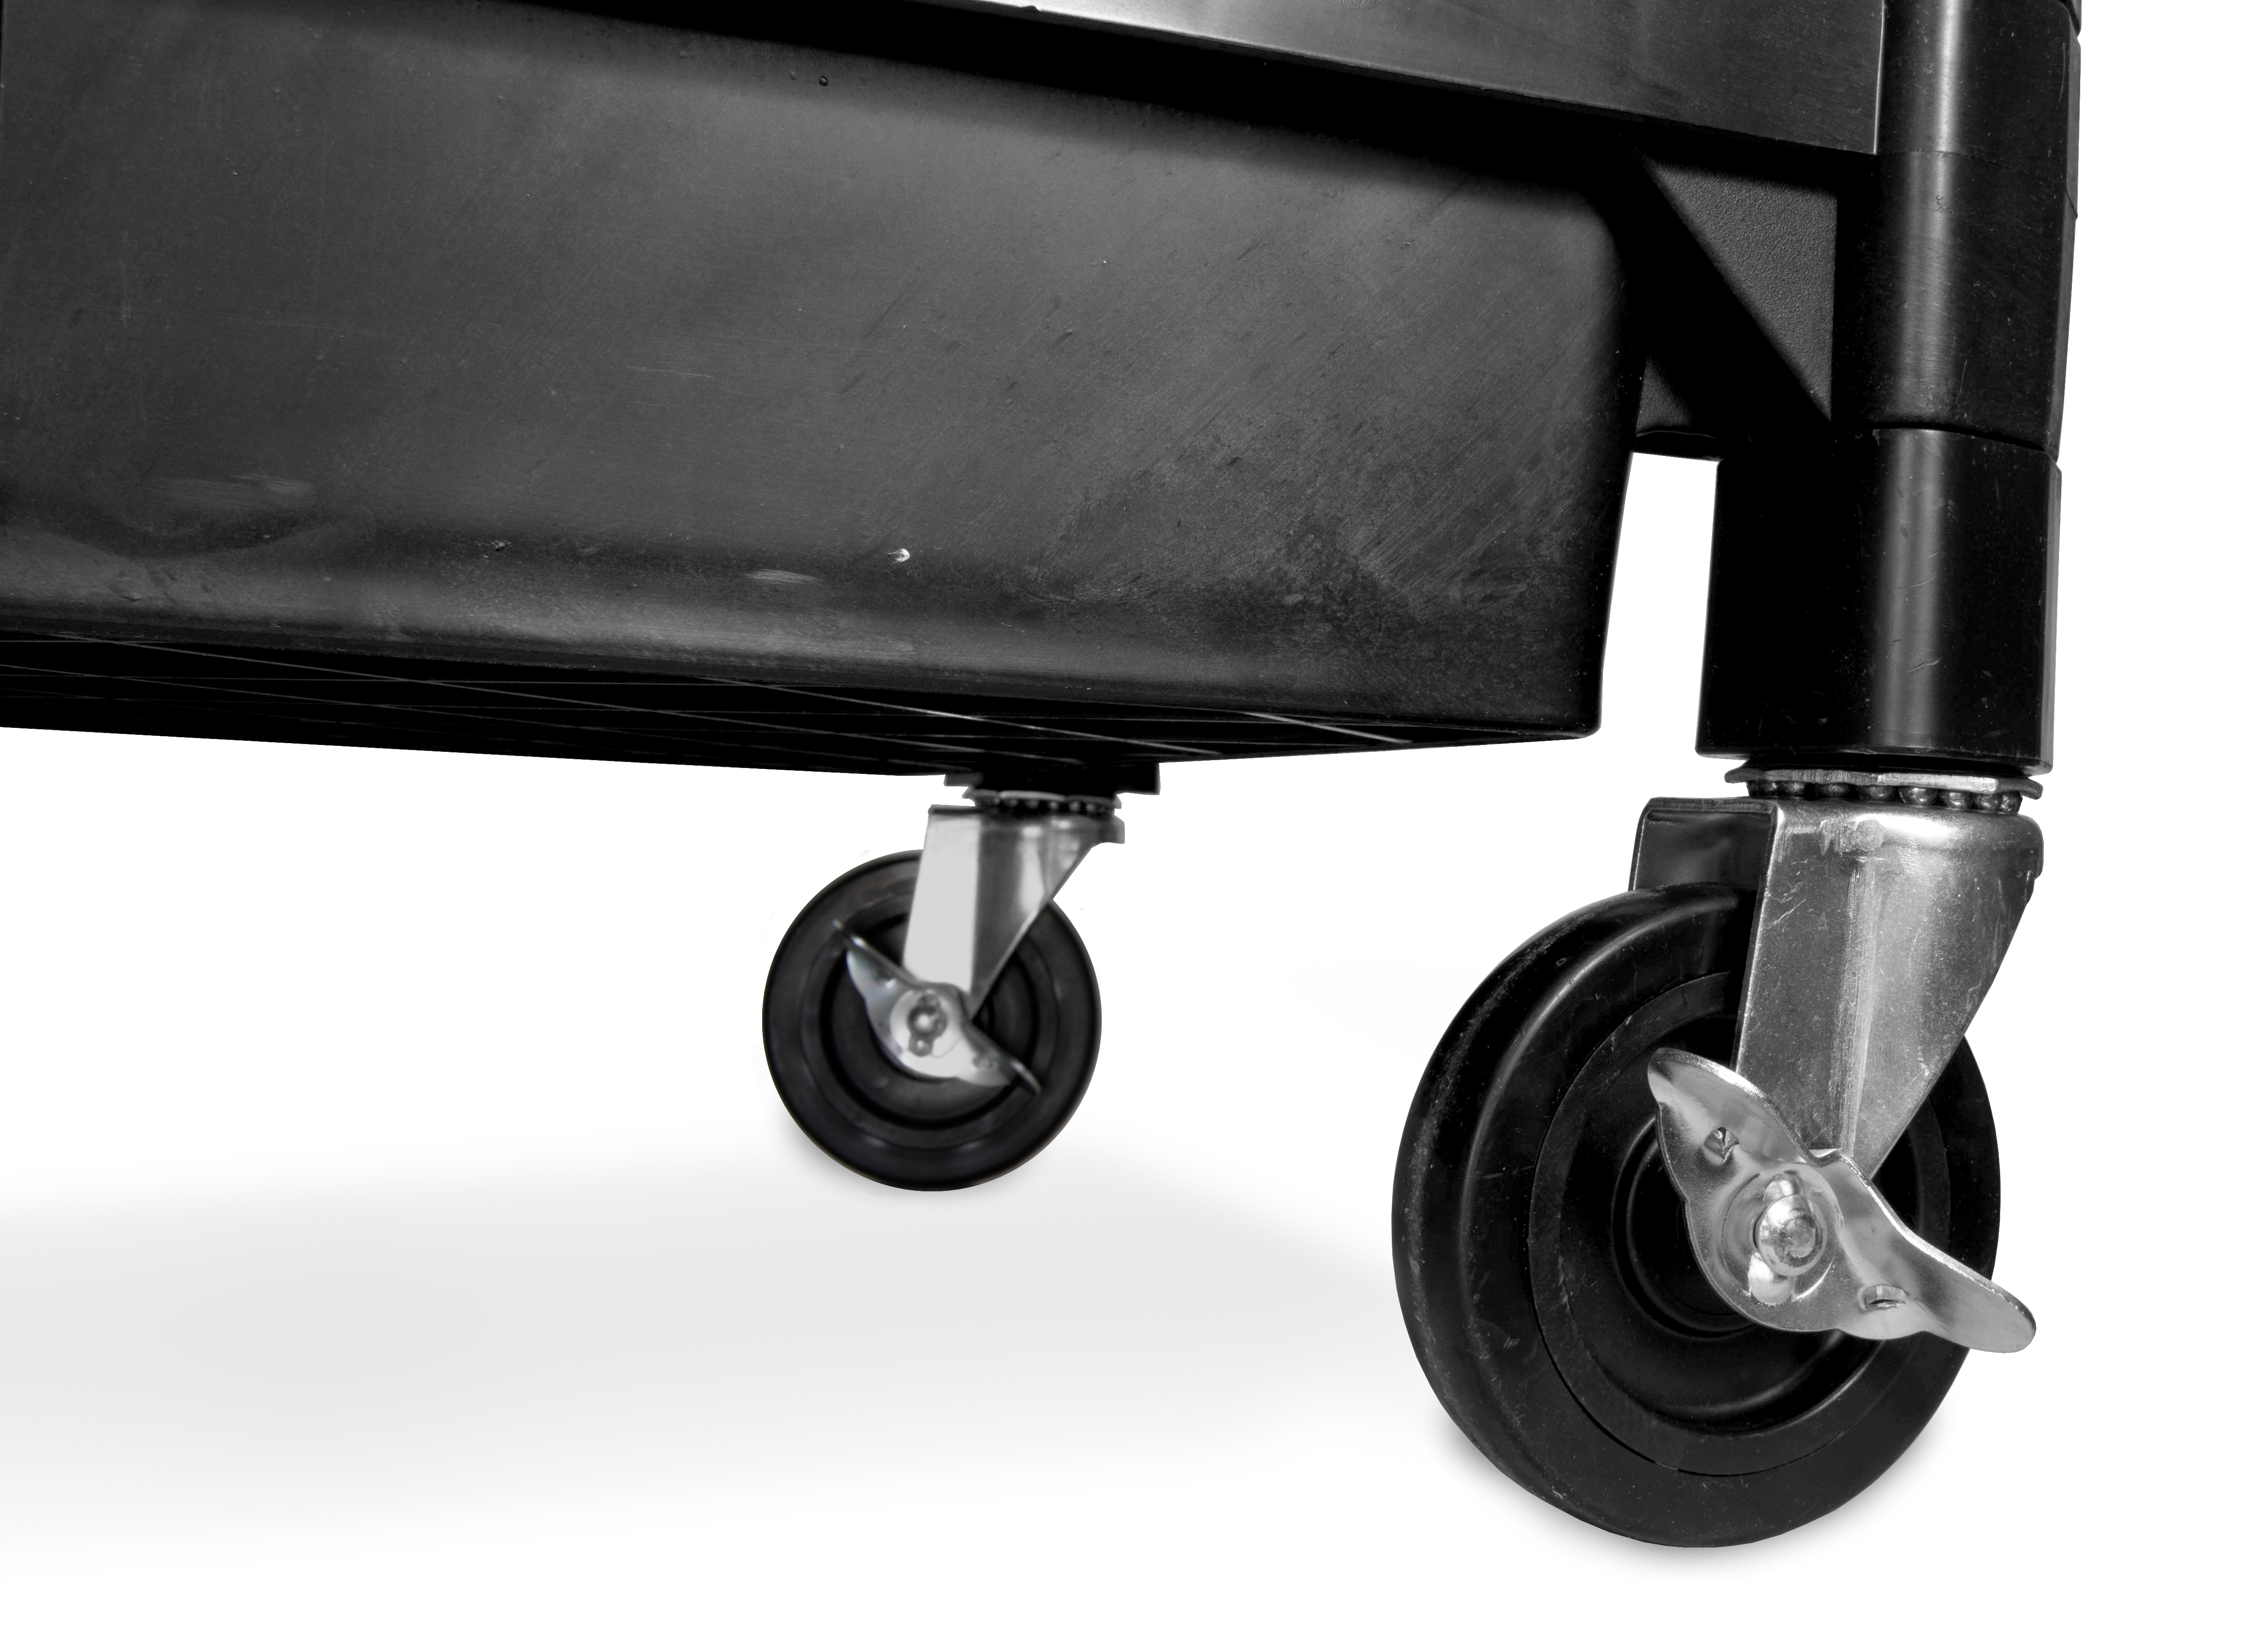 WEN Two-Tray 300-Pound Capacity Double Decker Service and Utility Cart, 73162 - image 5 of 5